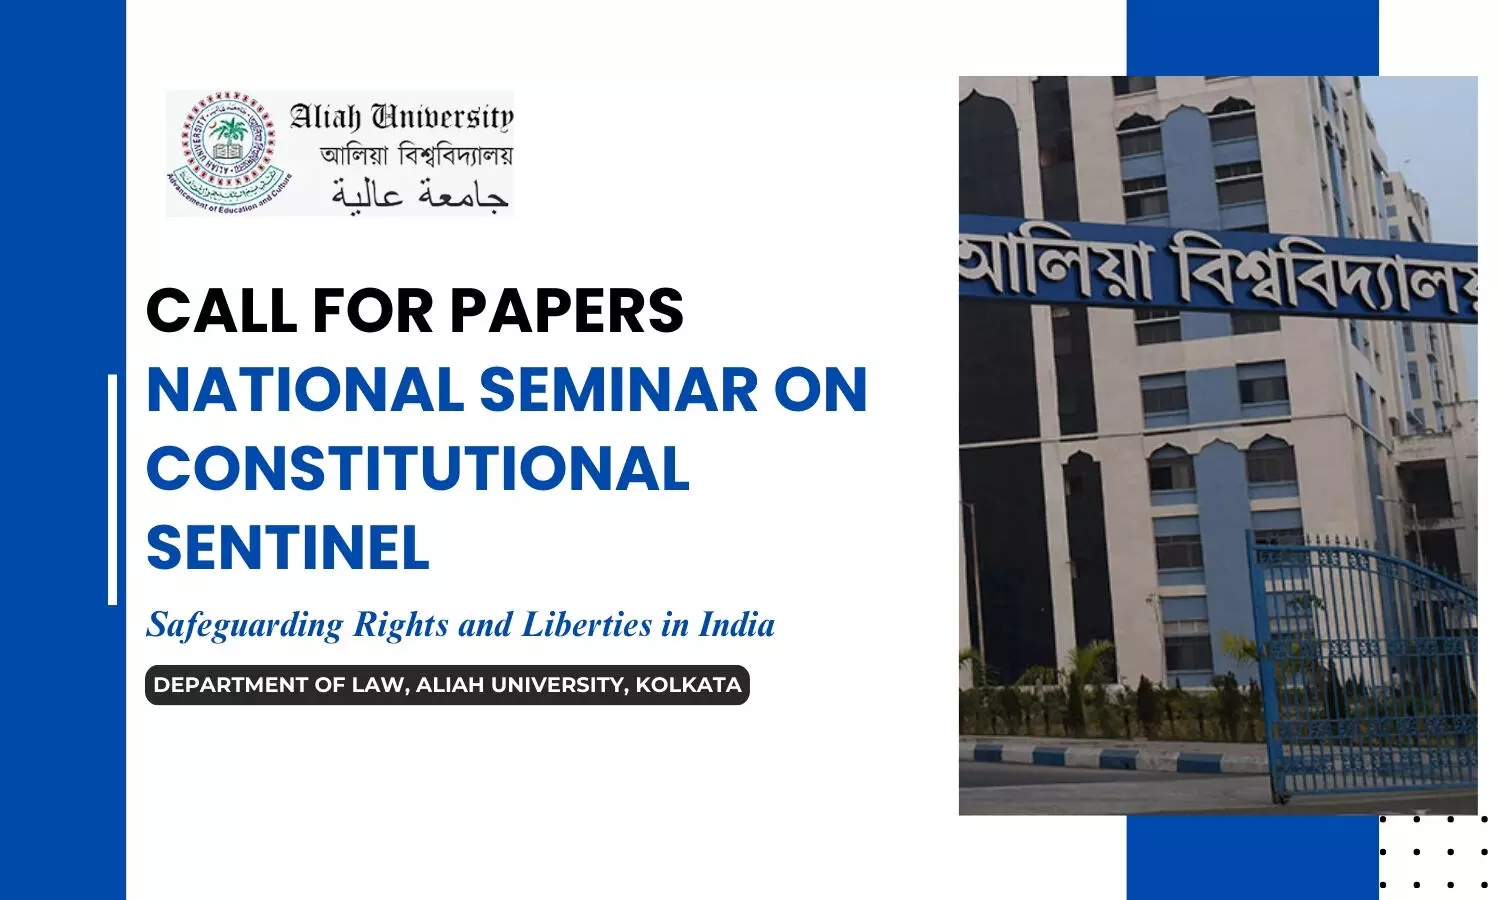 Call for Papers: National Seminar on Constitutional Sentinel: Safeguarding Rights and Liberties in India | Dept. of Law Aliah University, Kolkata